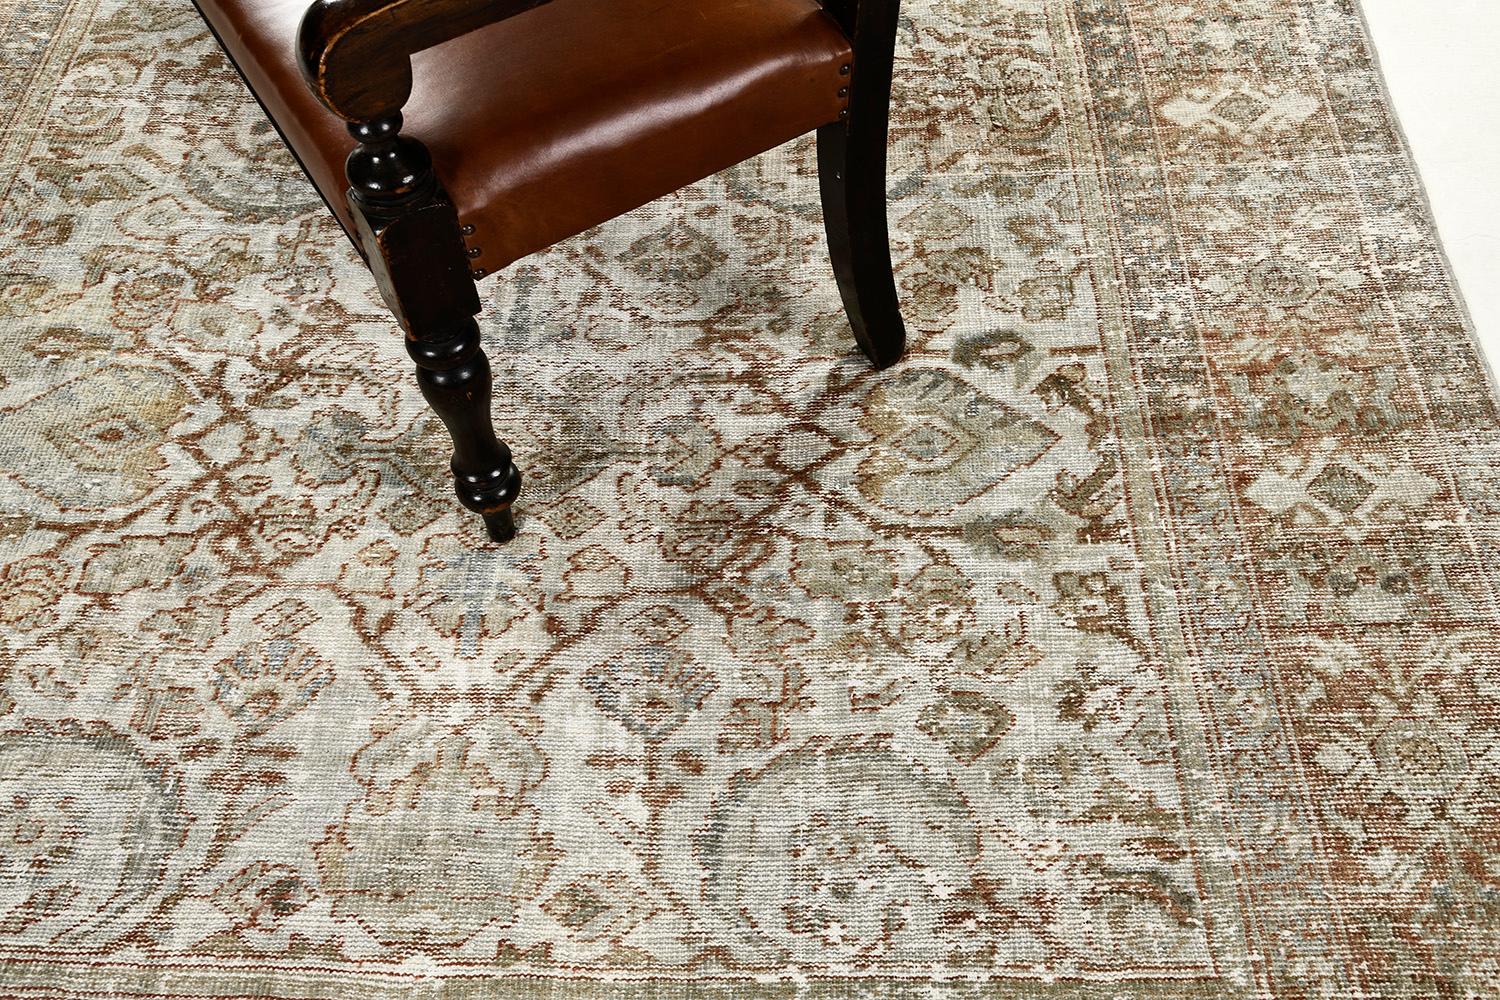 This majestic Mahal rug has created a stunning pattern. A well-coordinated ash and gold accents exemplify a big role in this masterpiece. This gorgeous rug is composed of fascinating florid elements forming different prominent medallions that create